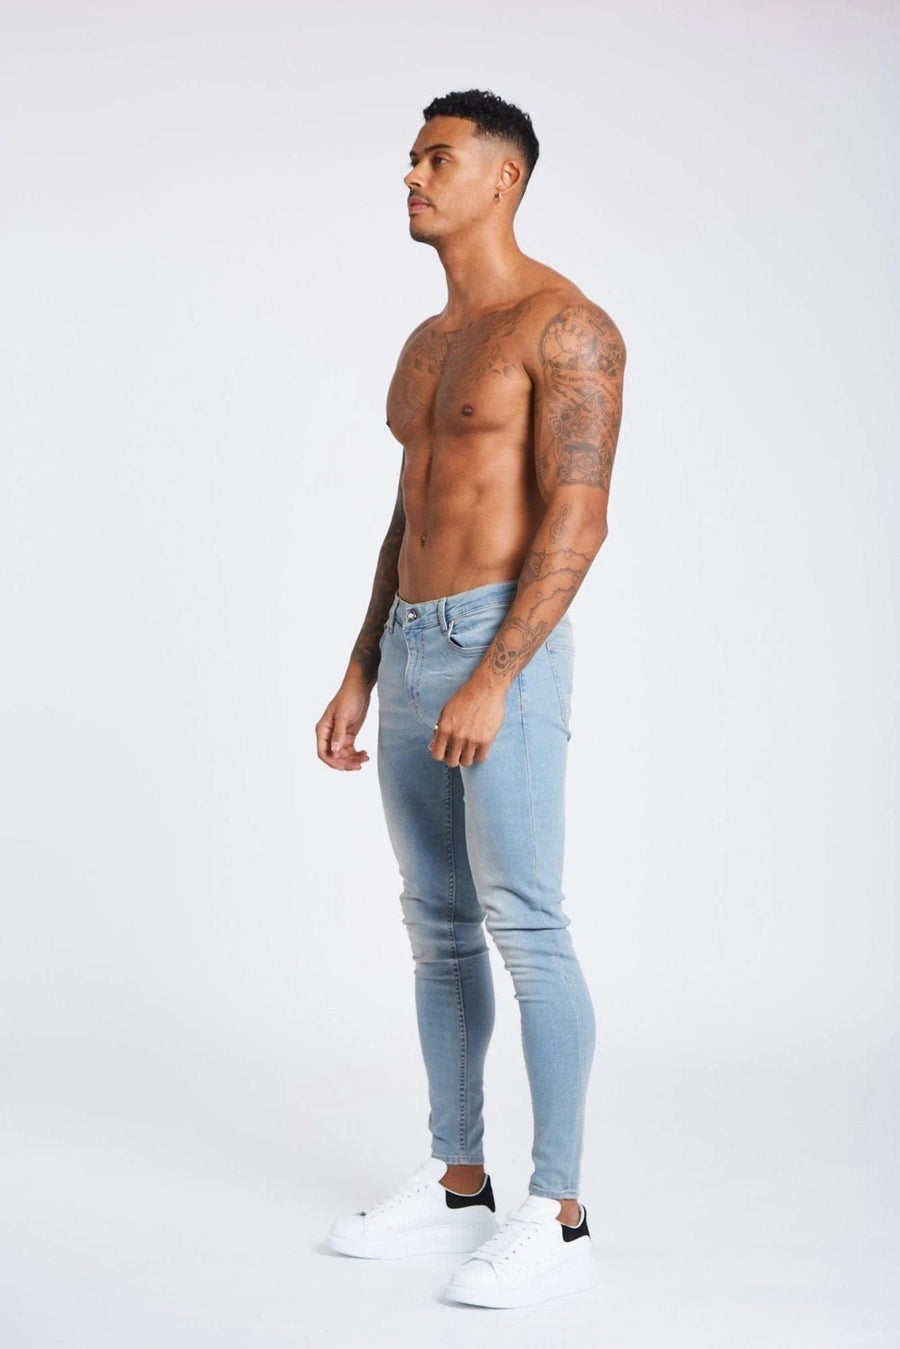 Legend London Jeans Stone Washed Spray on Jeans - Non Ripped